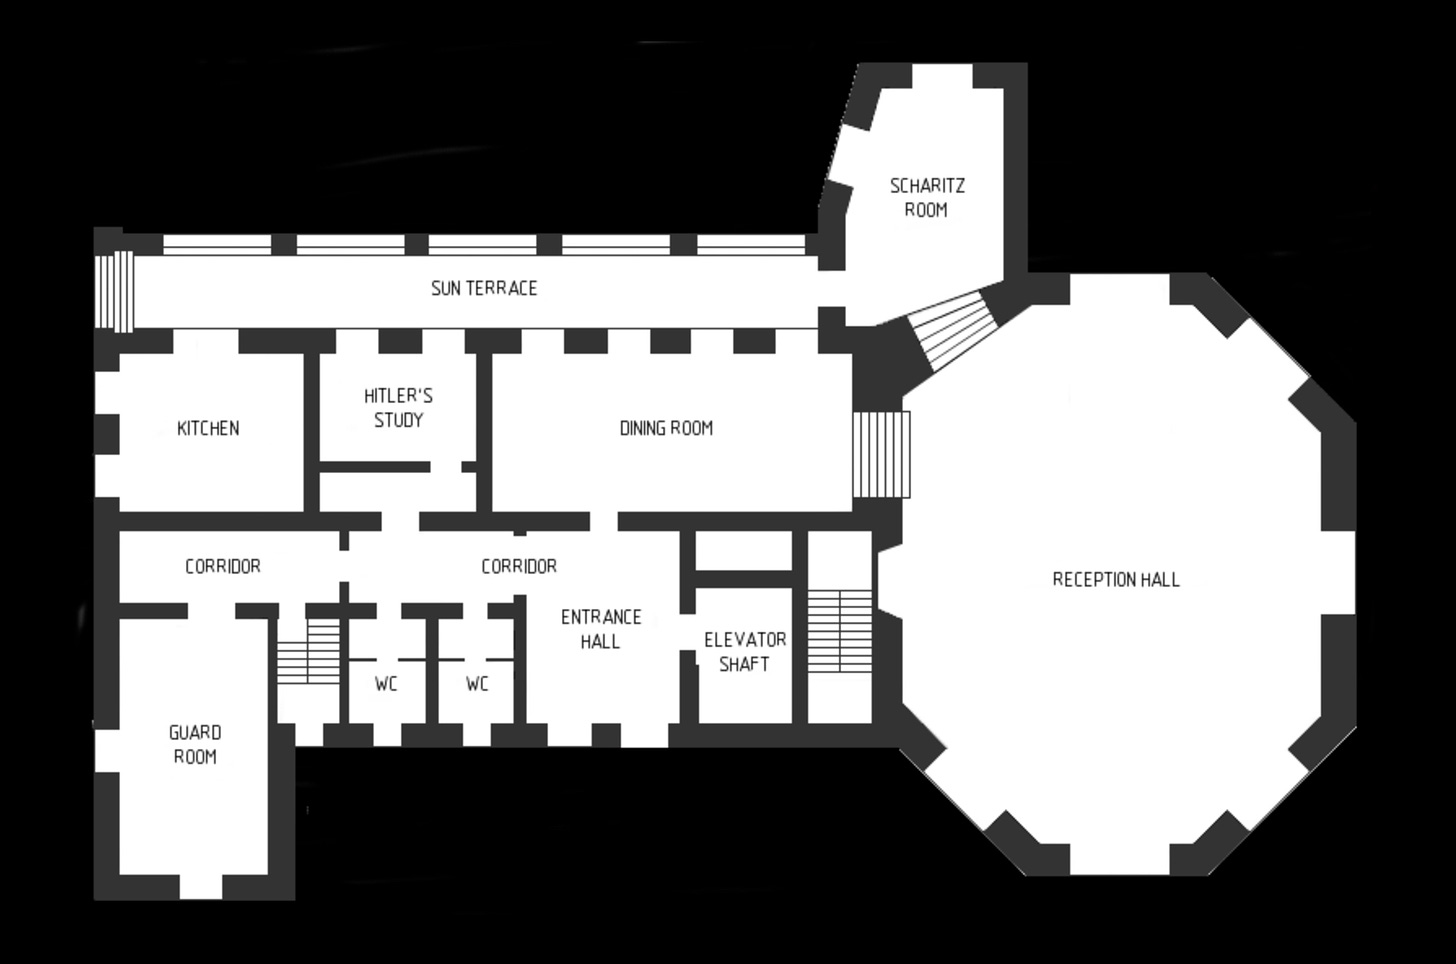 Layout showing there are only seven rooms two corridors, and two WCs.